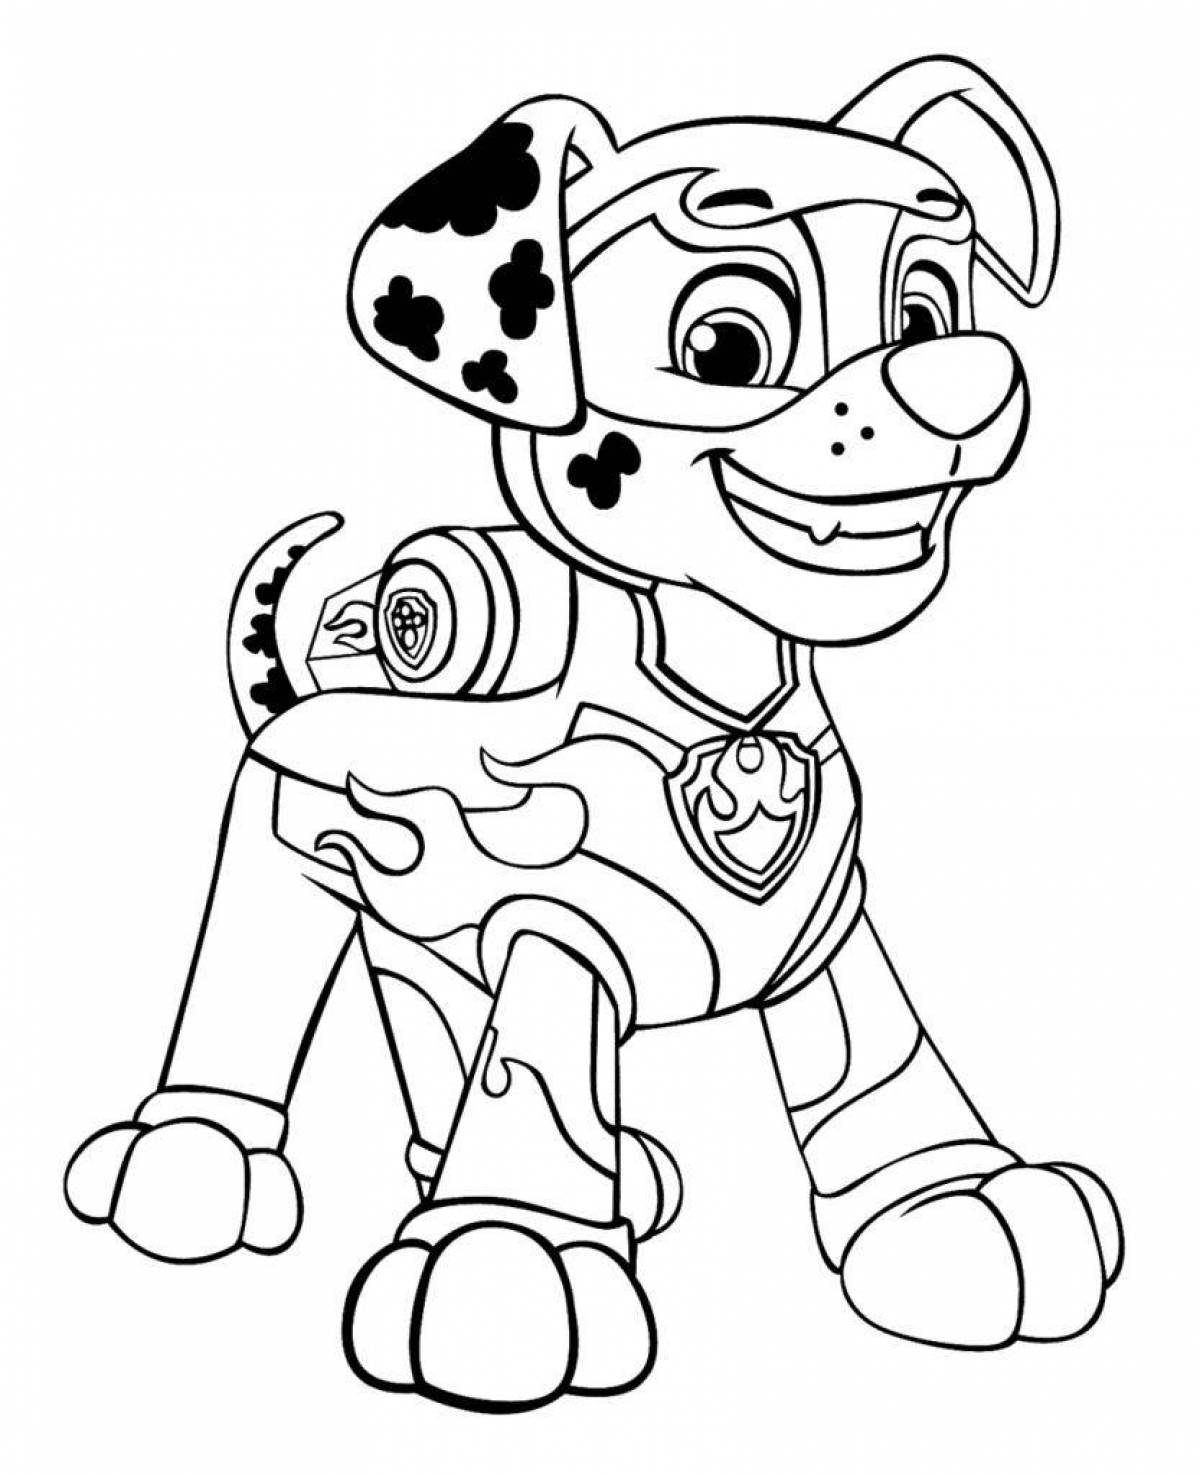 Awesome Paw Patrol Coloring Page